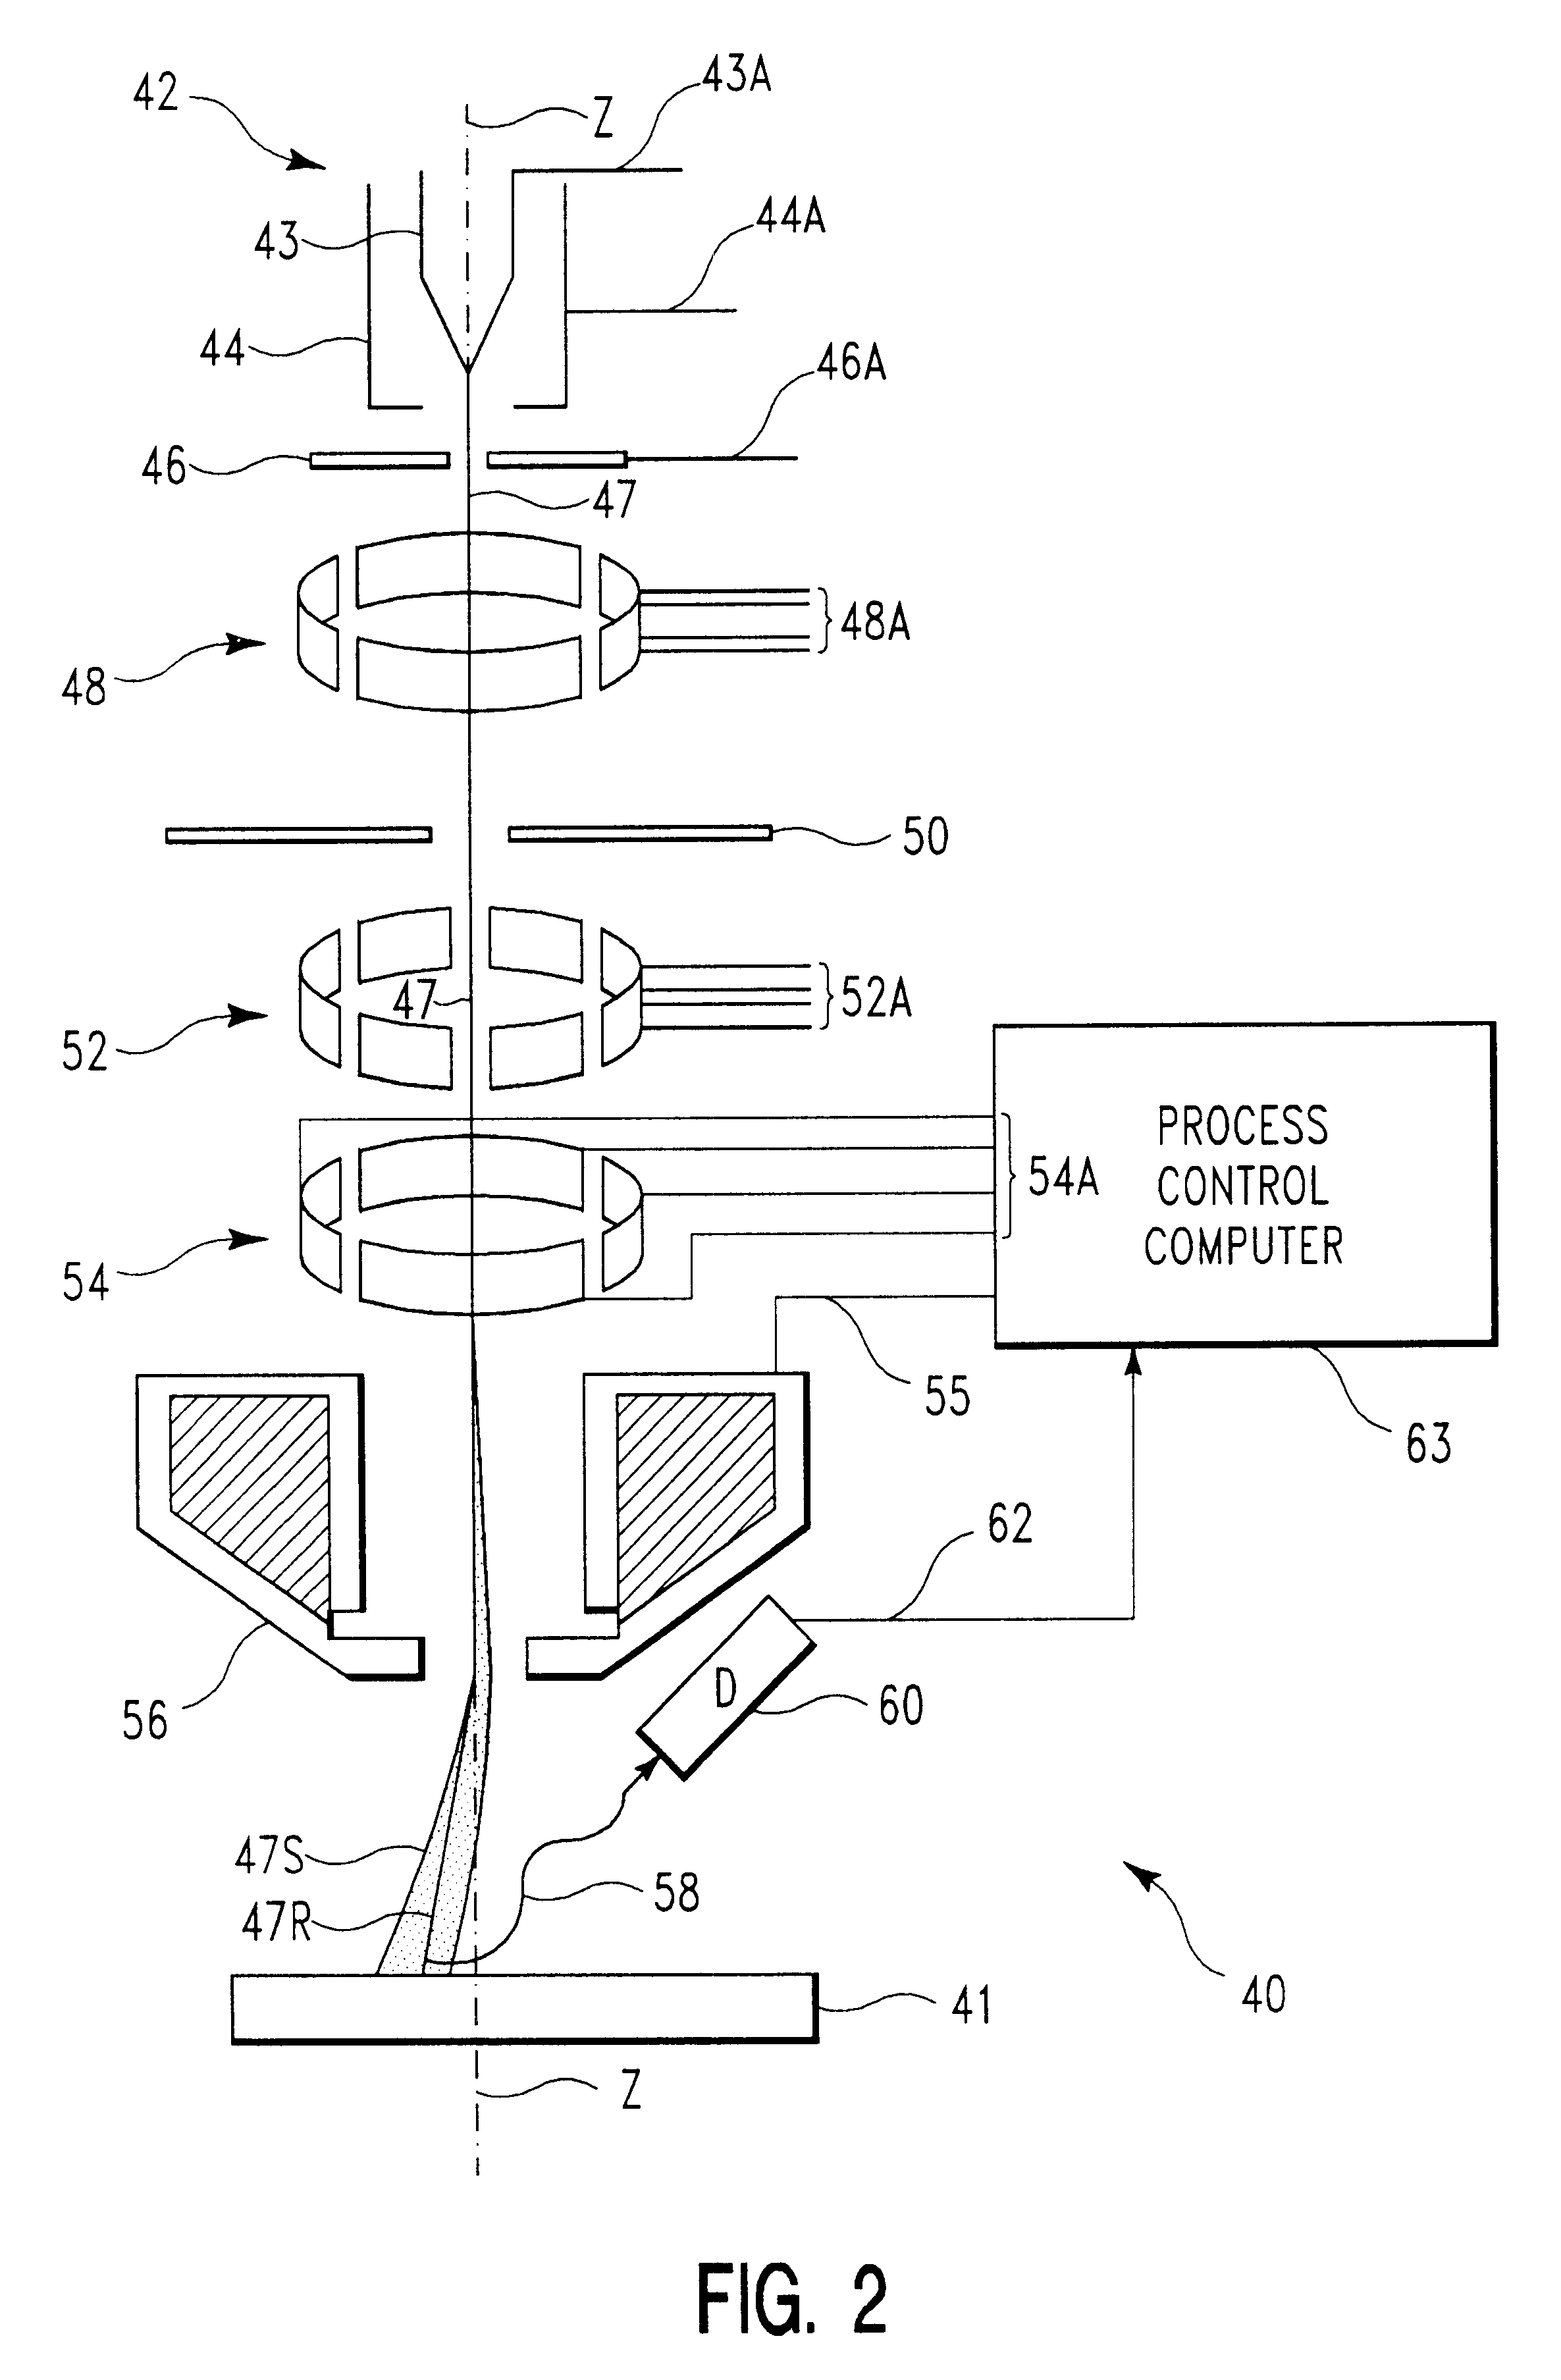 Automated method for determining several critical dimension properties from scanning electron microscope by using several tilted beam or sample scans